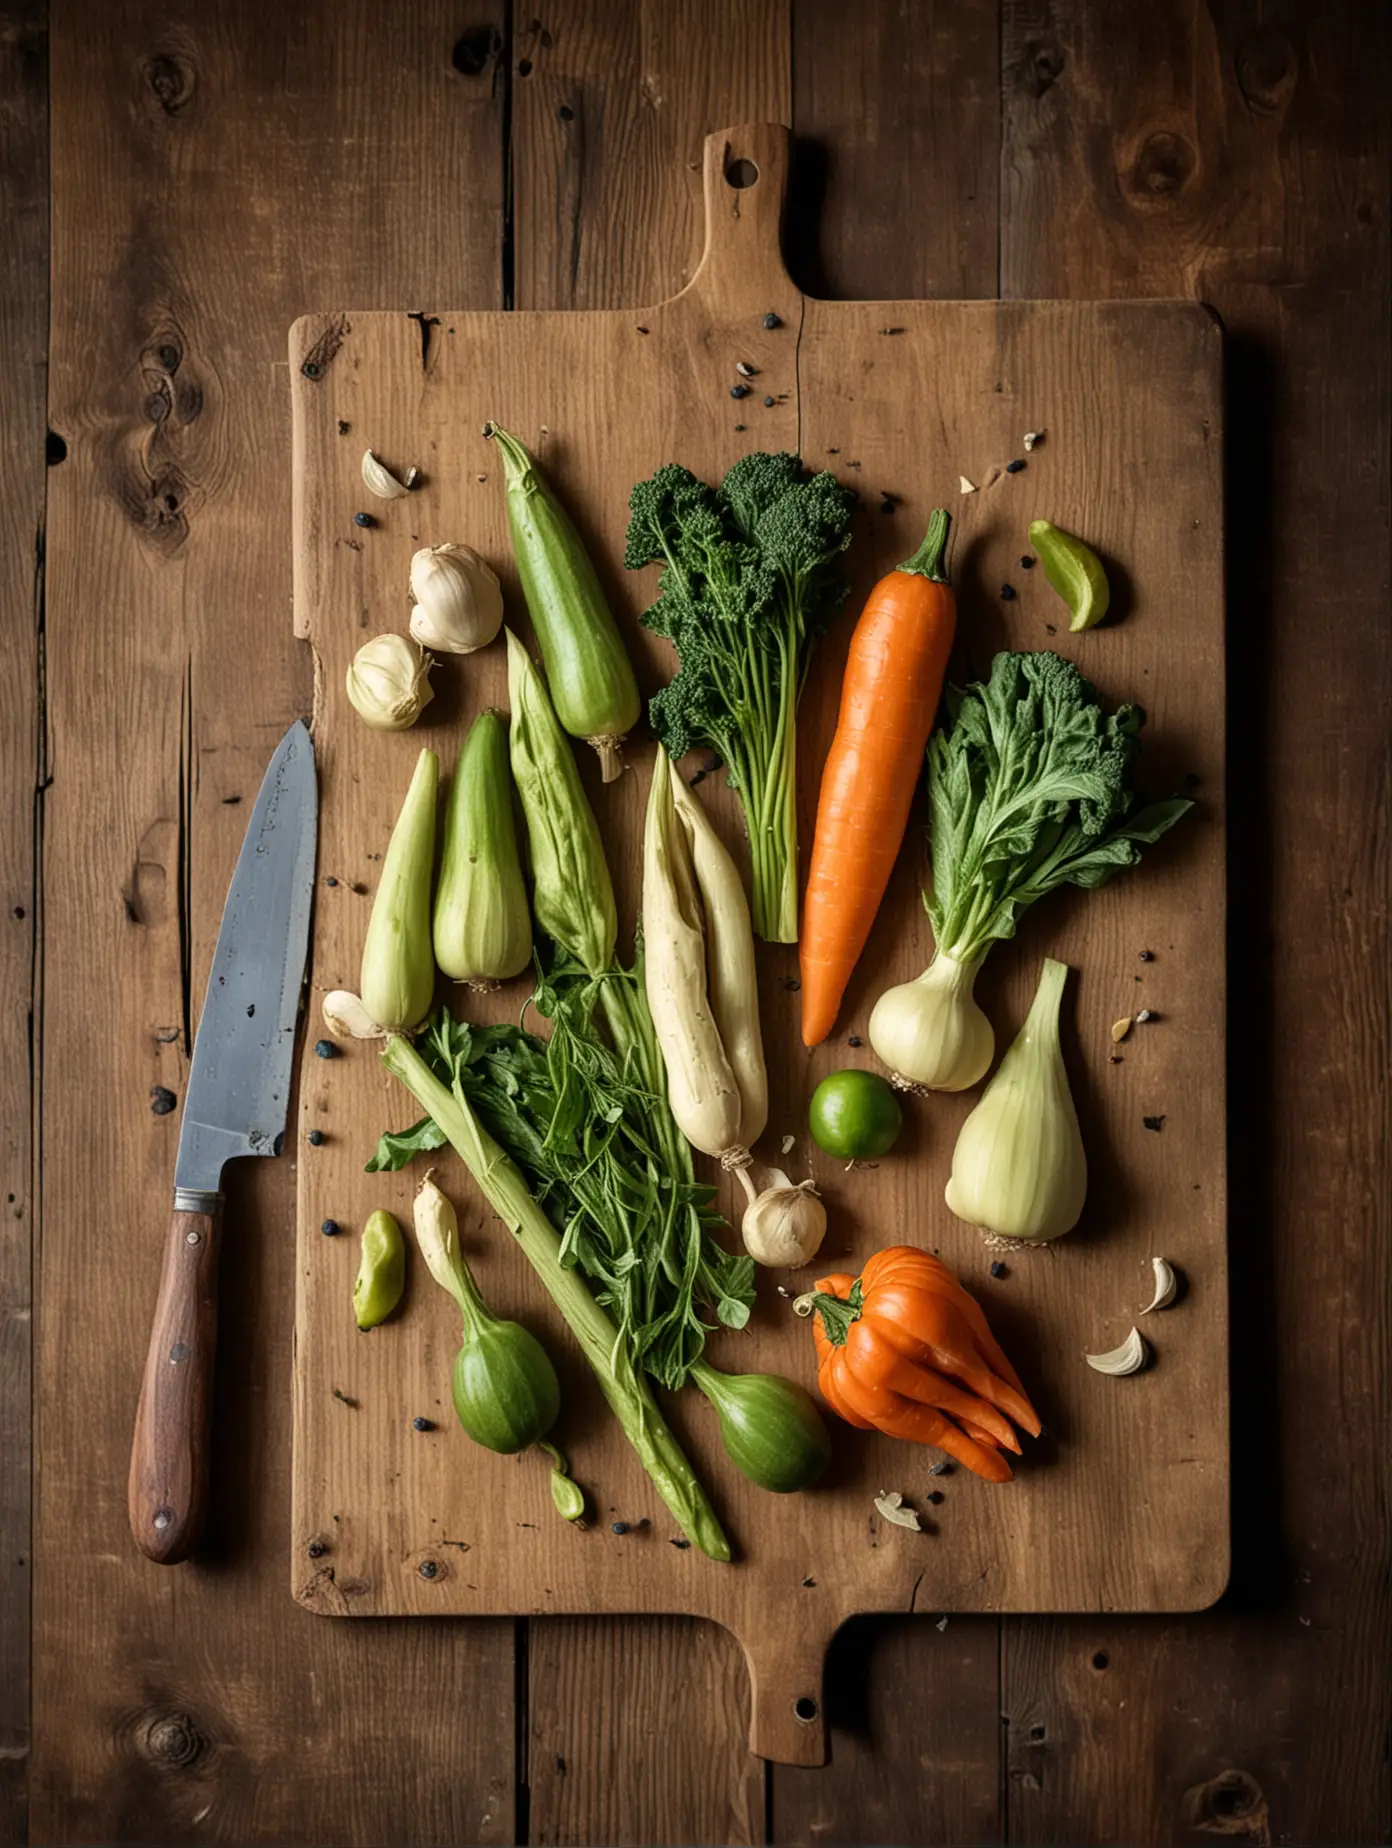 Rustic Still Life of Fresh Vegetables with Antique Knife on Wooden Tabletop